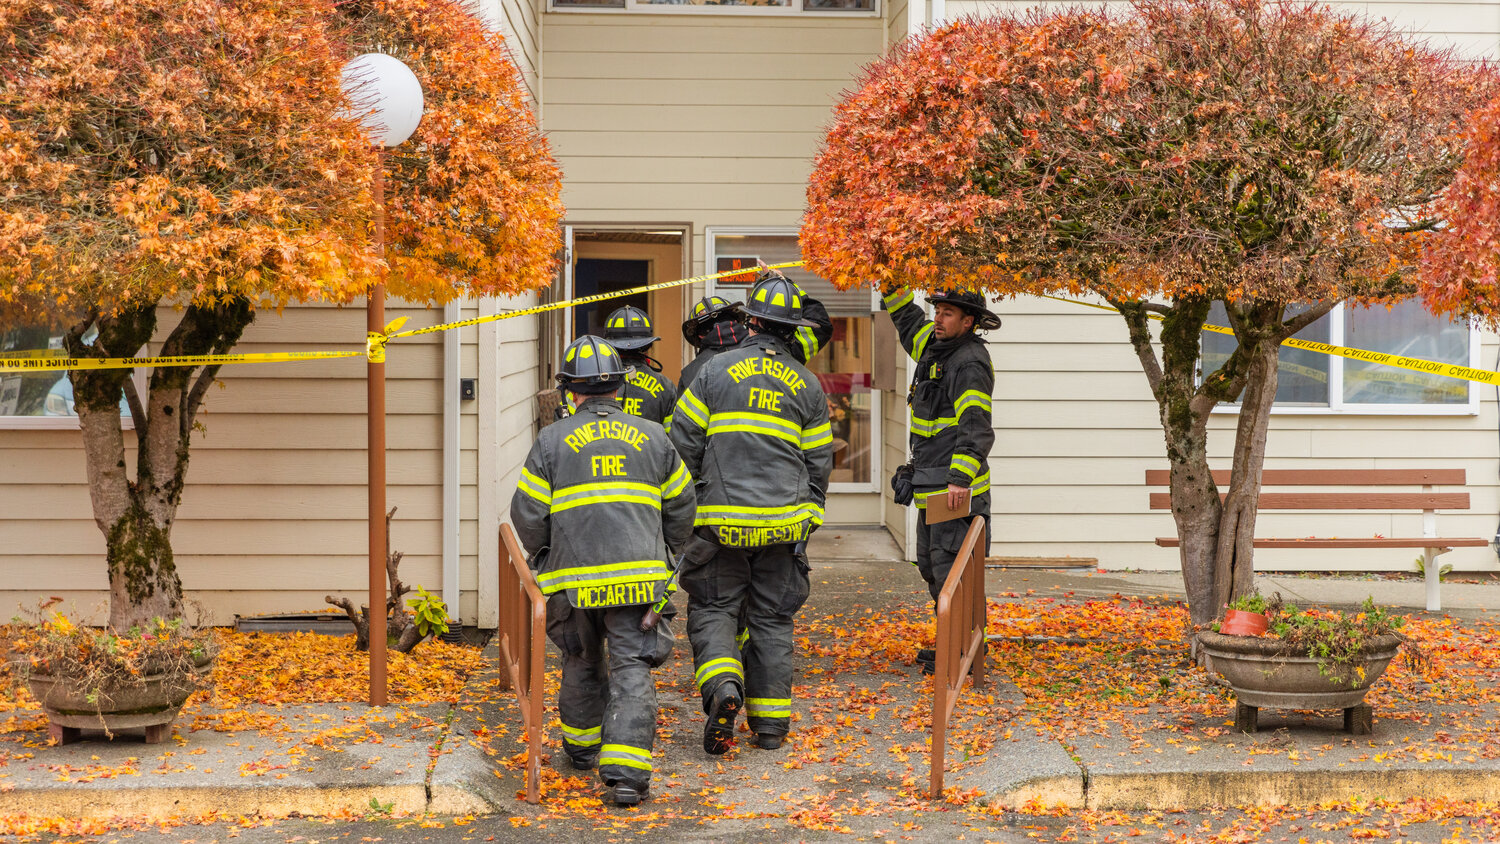 Riverside Fire Authority enters the Centralia Manor Apartments following a fire on Wednesday, Nov. 29.